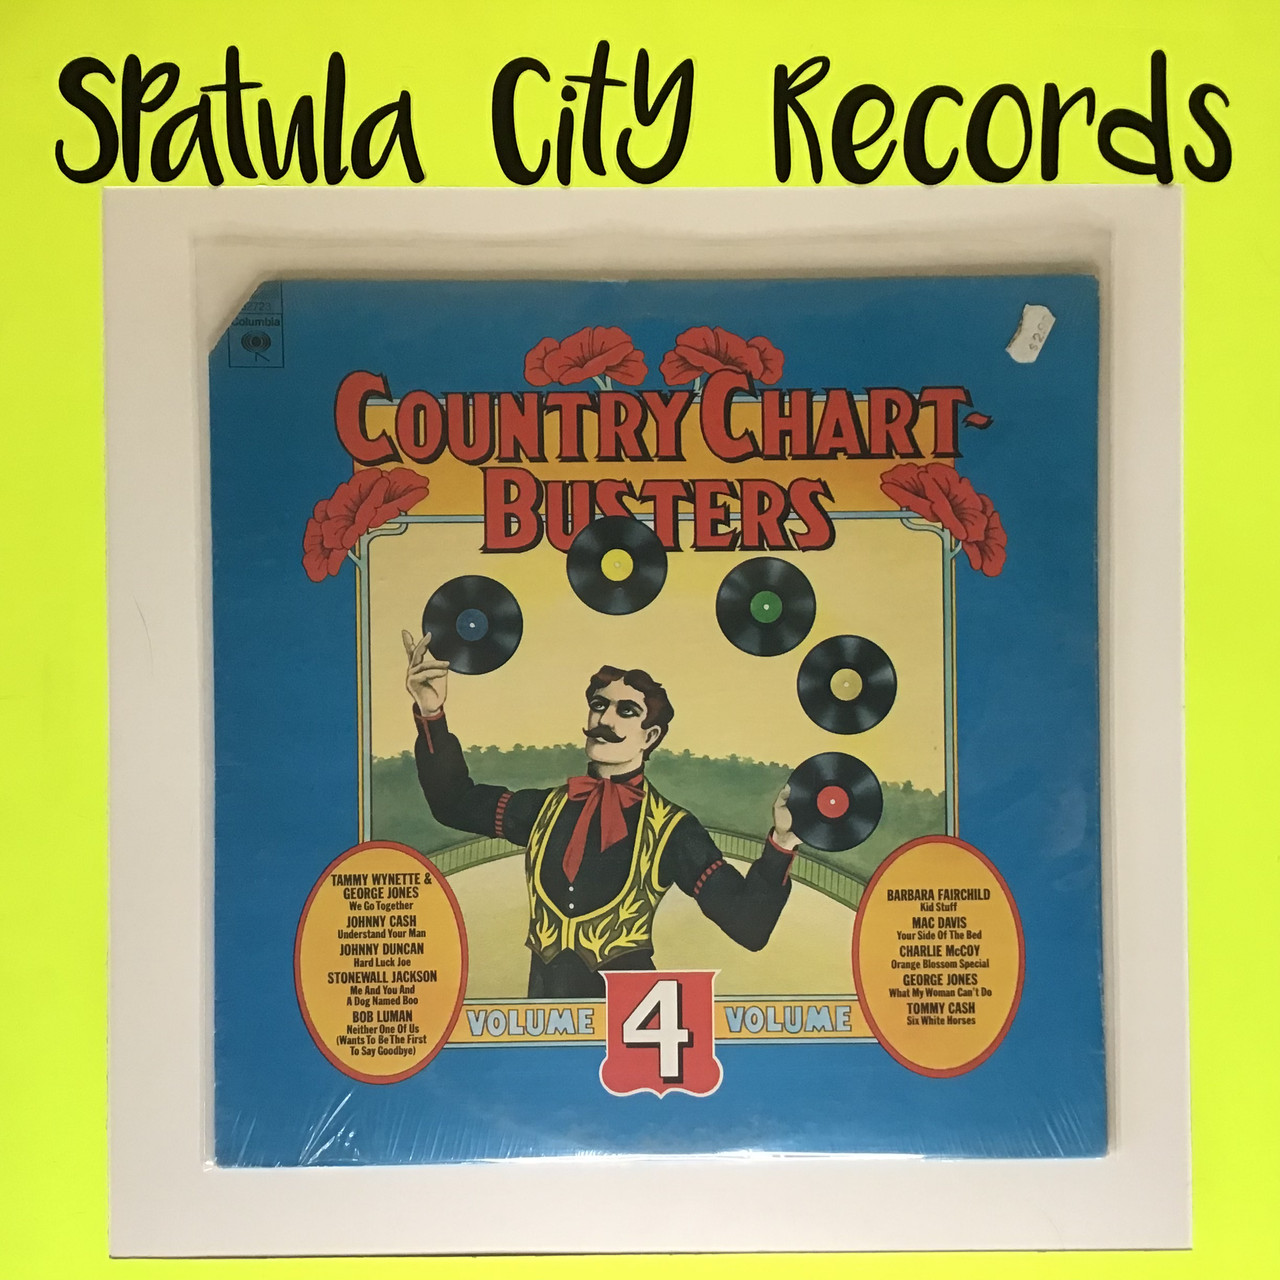 Country Chart Busters - Volume 4 SEALED  - vinyl record album LP